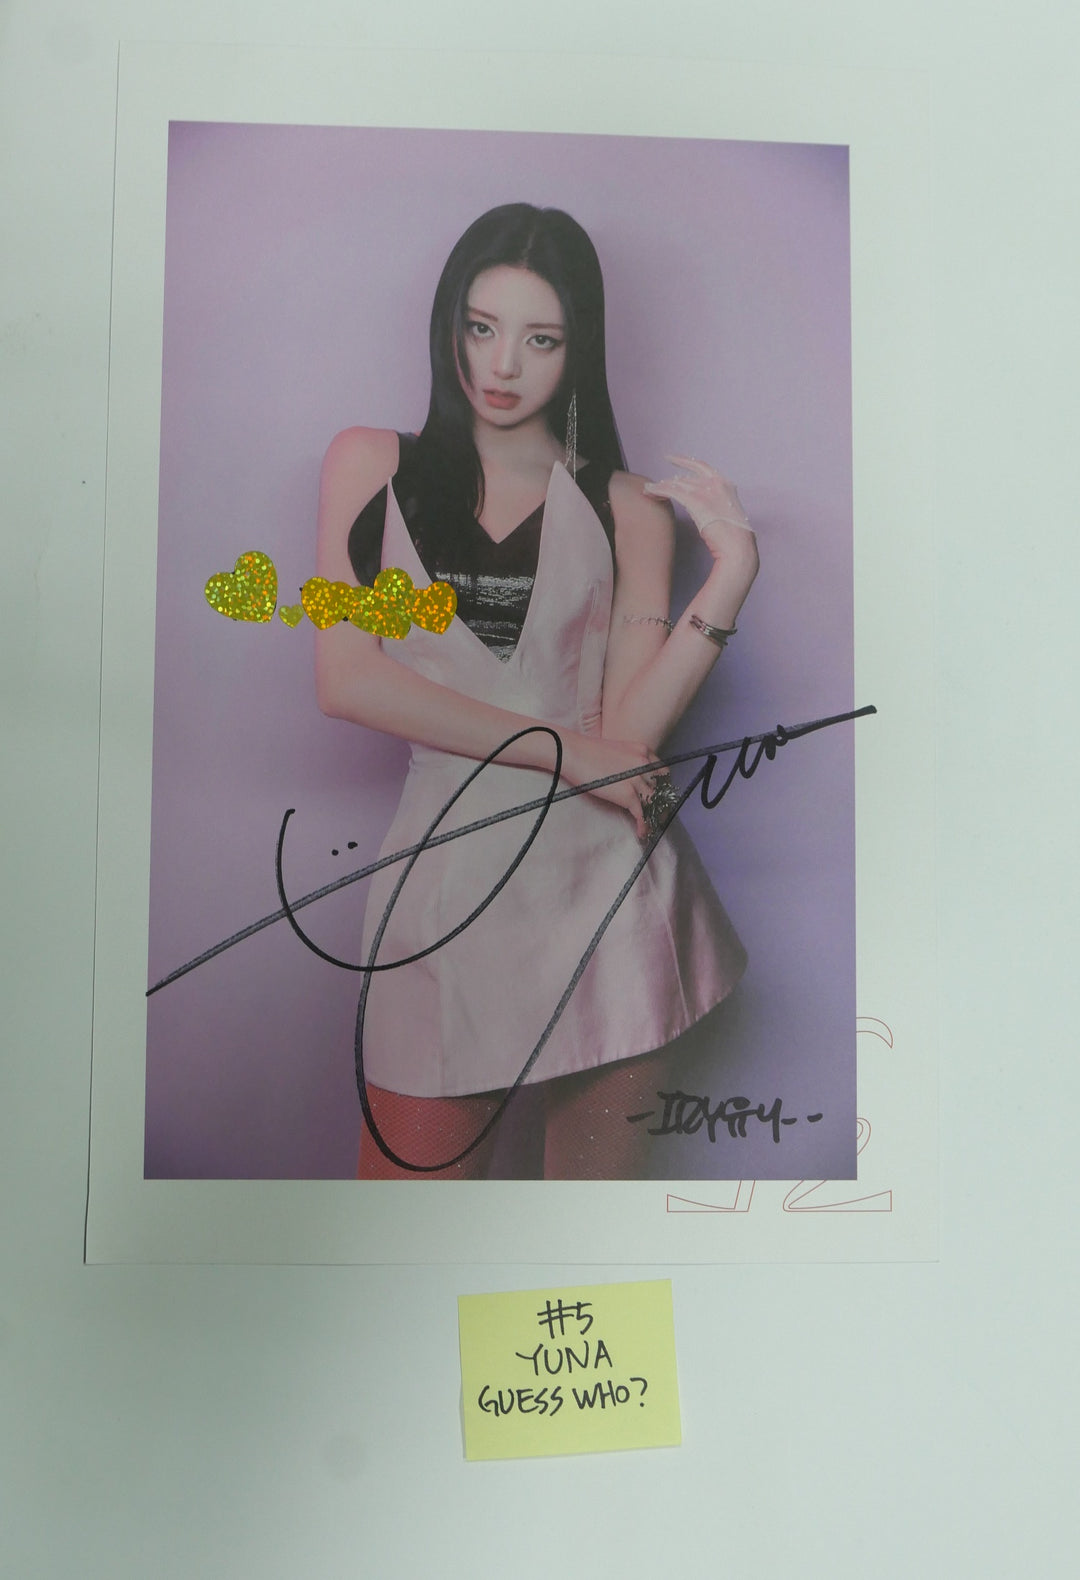 [ITZY,Cignature] - A Cut Page From Fansign Event Album Photo